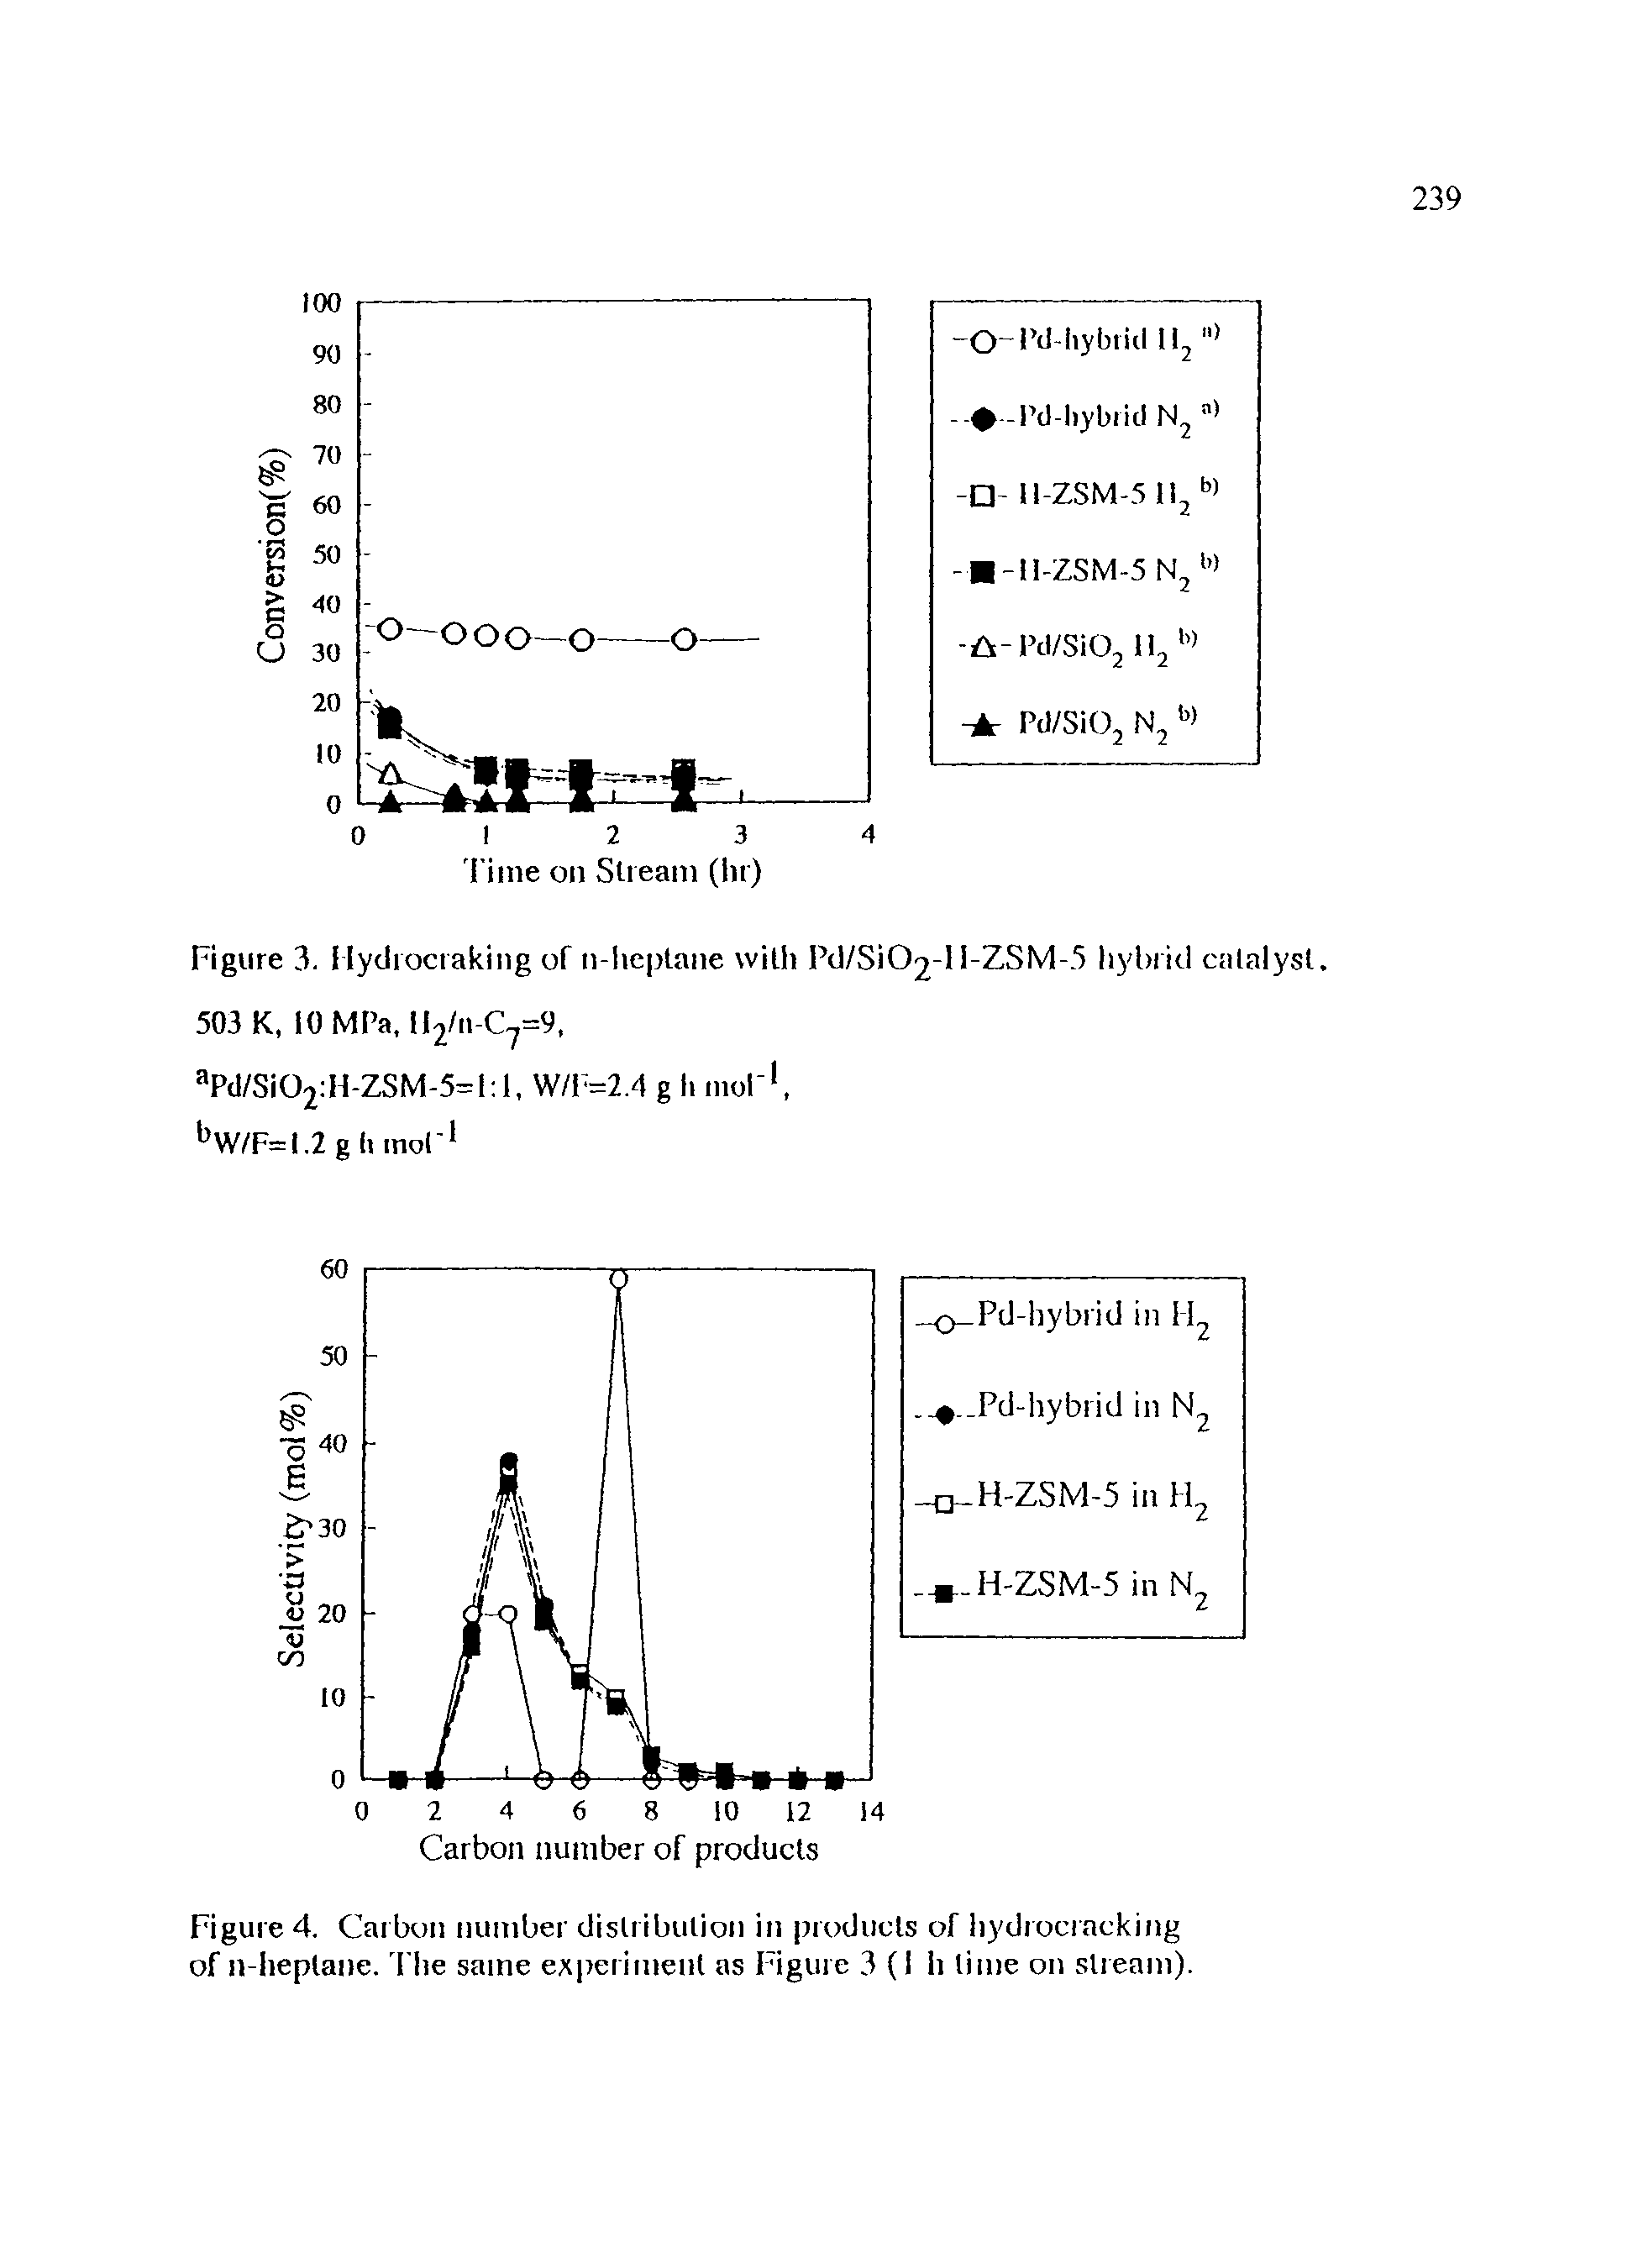 Figure 4. Carbon number distribution in products of hydrocracking of n-heptane. 3 he same experiment as Figure 3 (i h lime on stream).